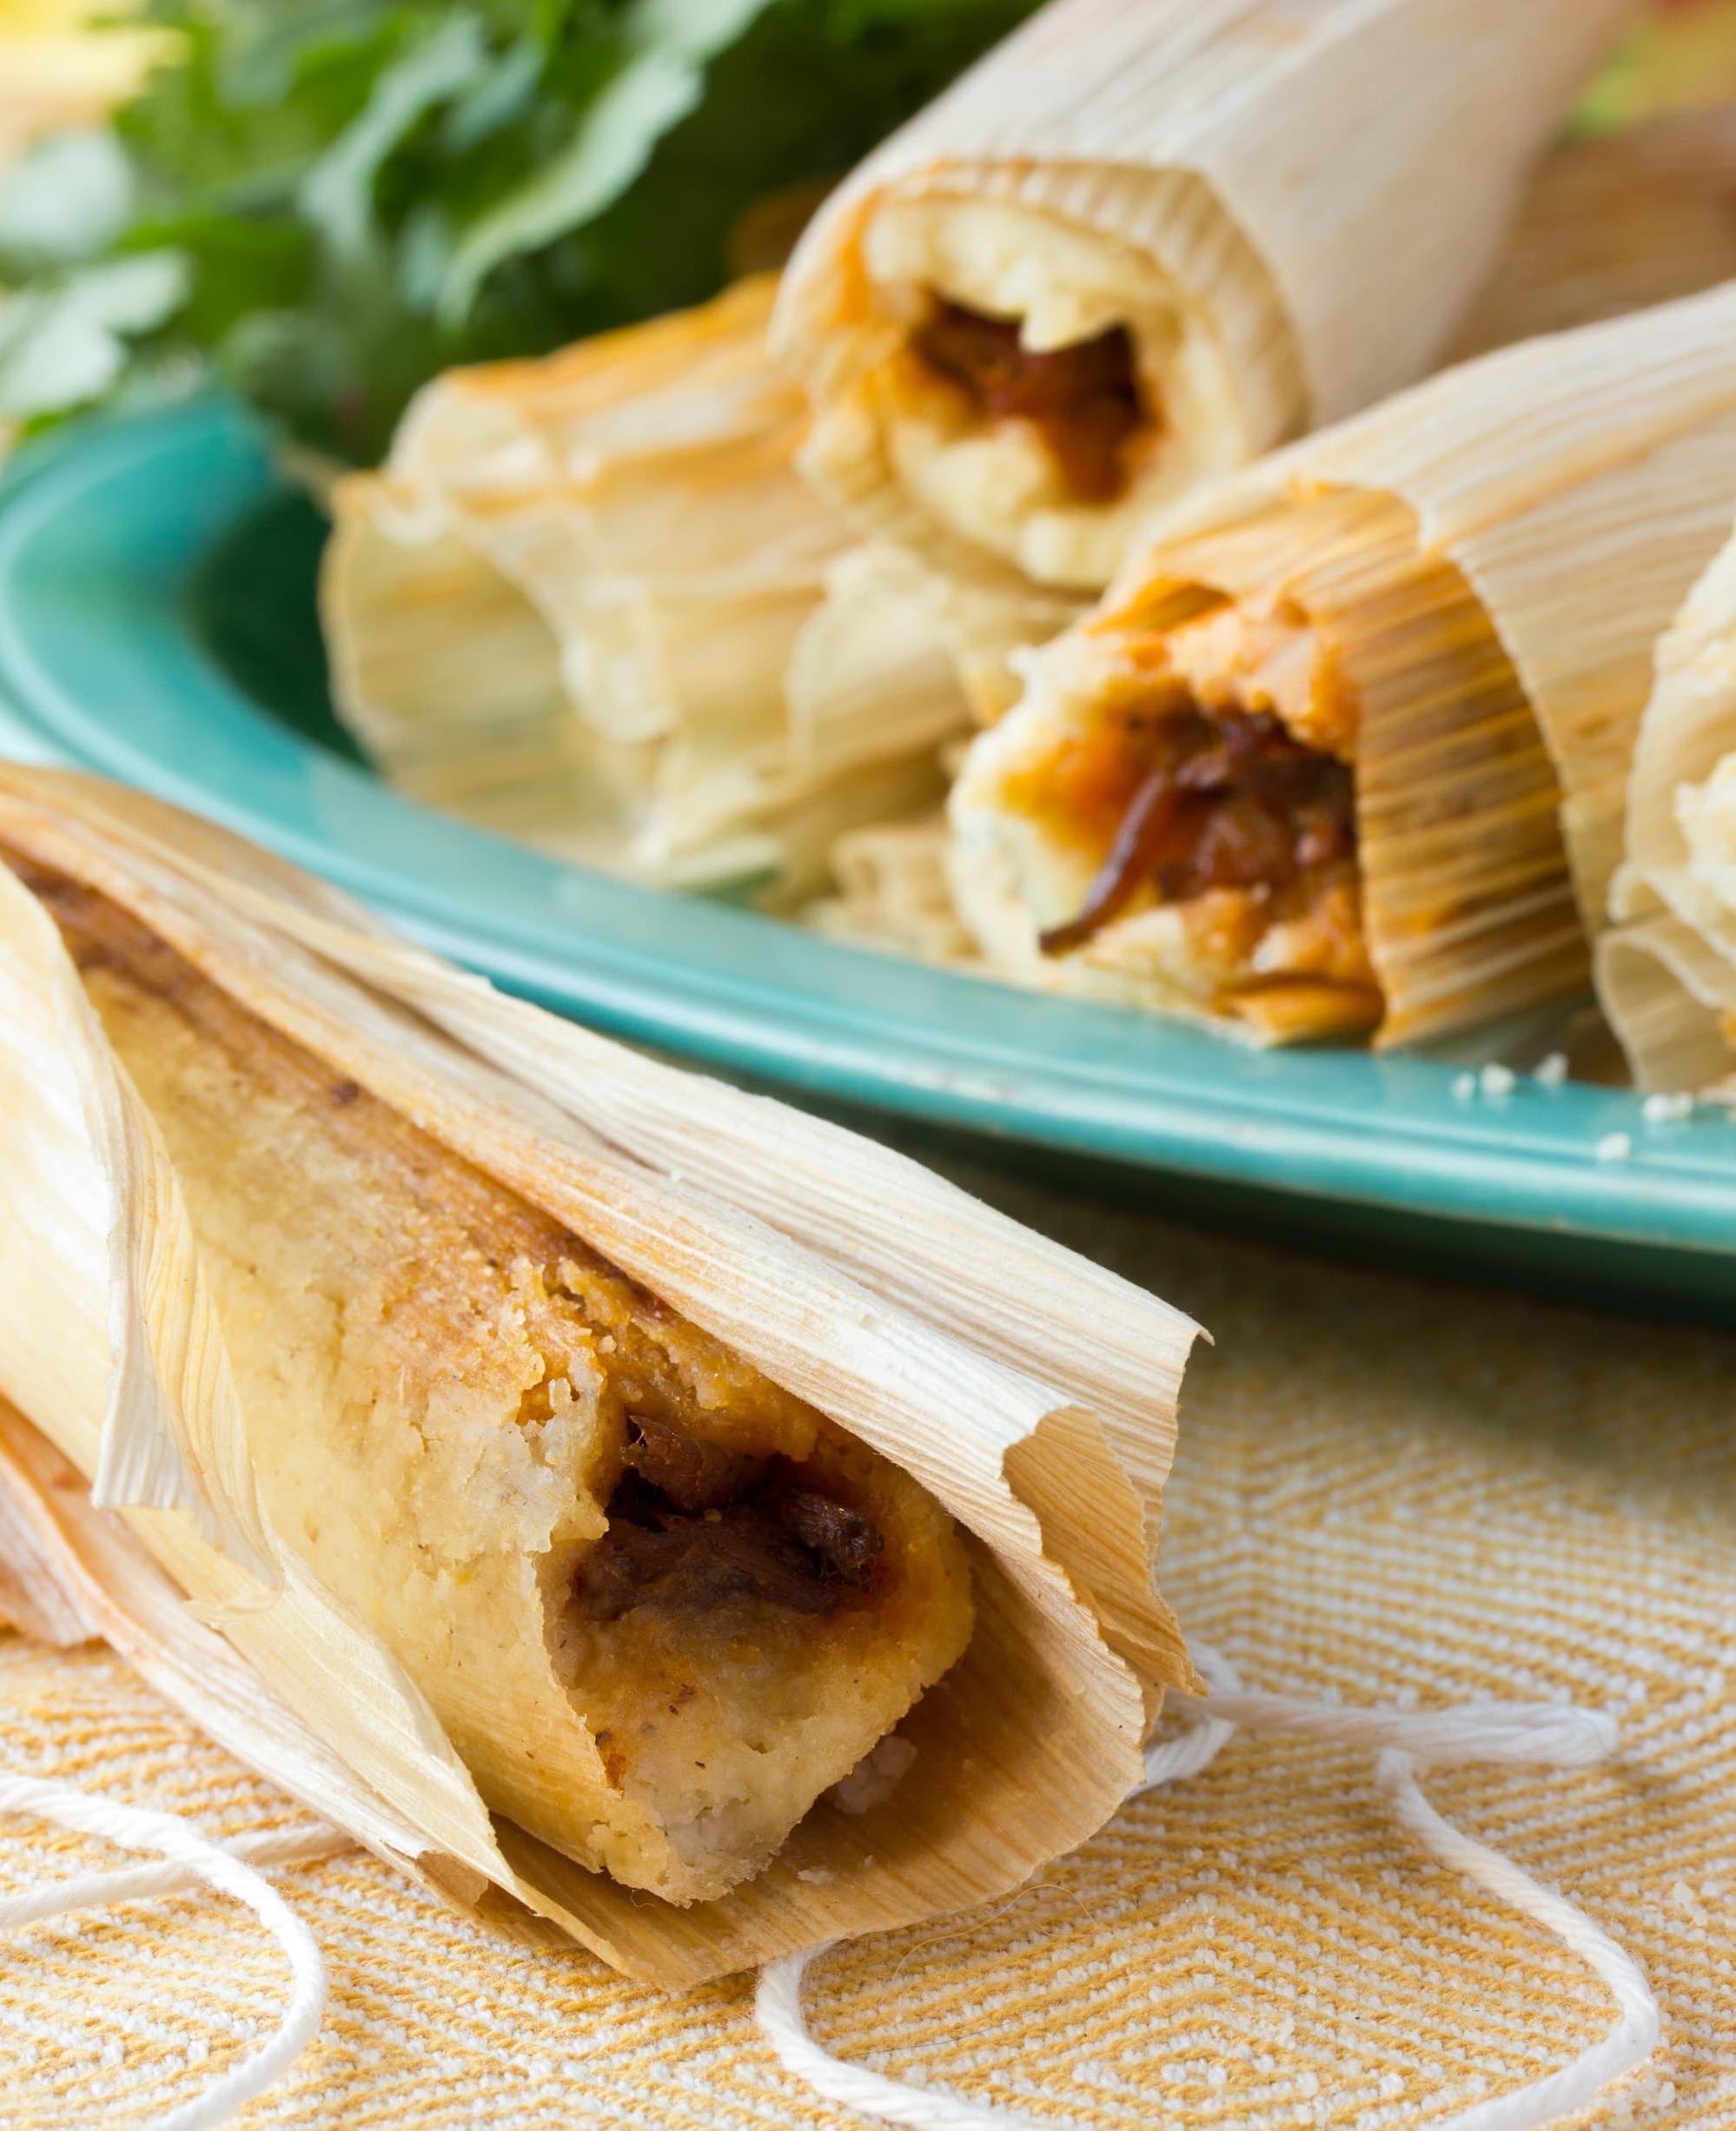  A delicious homemade tamale that will make your taste buds dance.